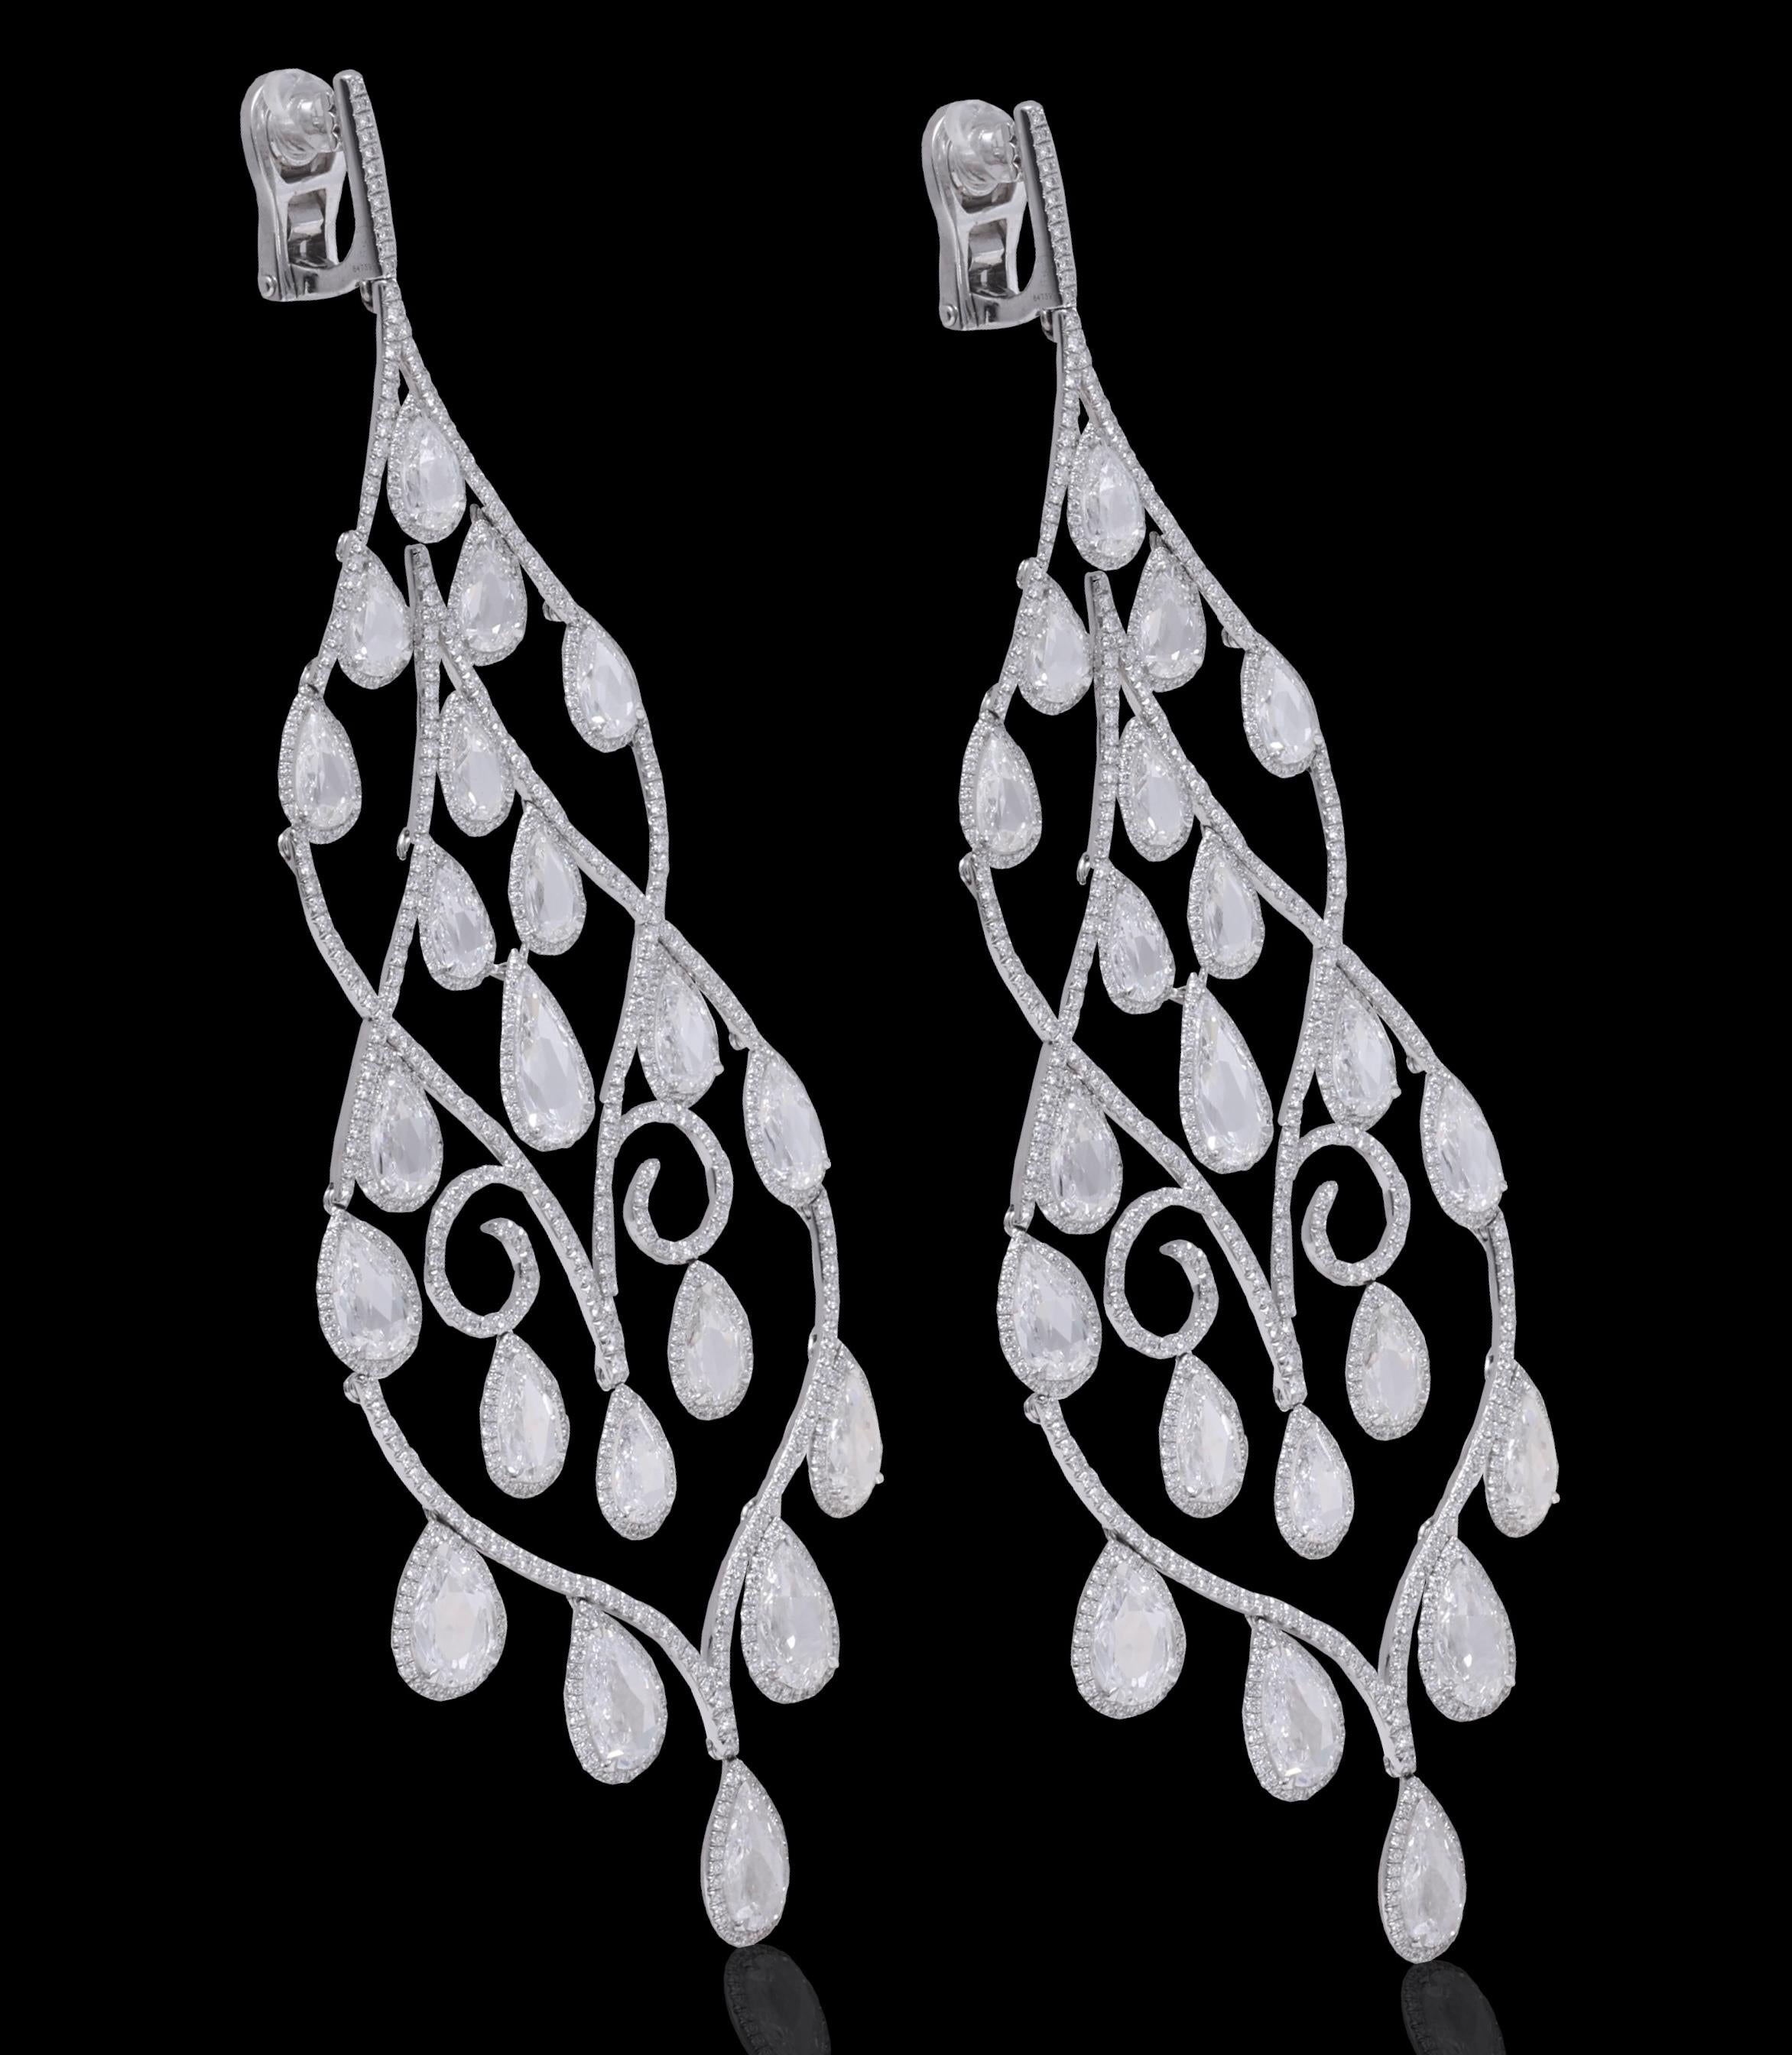 A Spectacular Pair of Grand 18 kt. White Gold Chopard Chandelier Earrings With approx.. 28.56 ct. Diamonds

One of a kind amazing earrings from the High Jewellery Chopard Collection.

Diamonds: Brilliant cut diamonds together approx. 7.56 ct. 
Pear